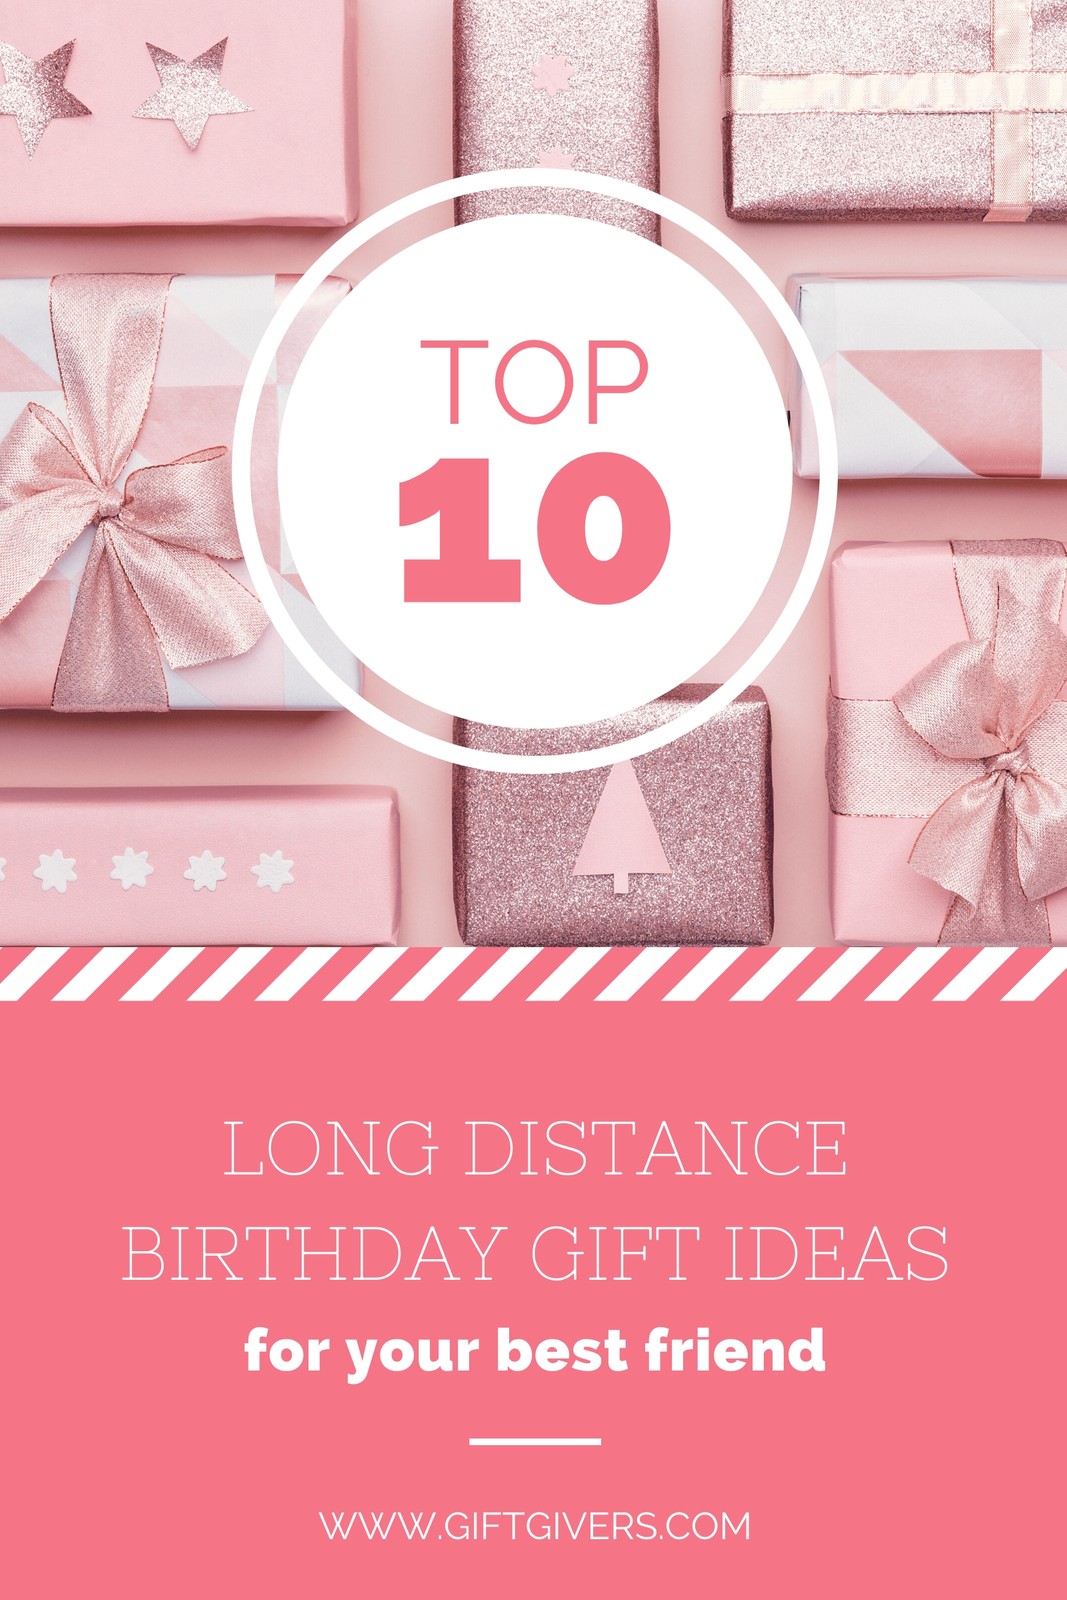 Gift Ideas Long Distance Birthday Blog Graphic Templates By Canva